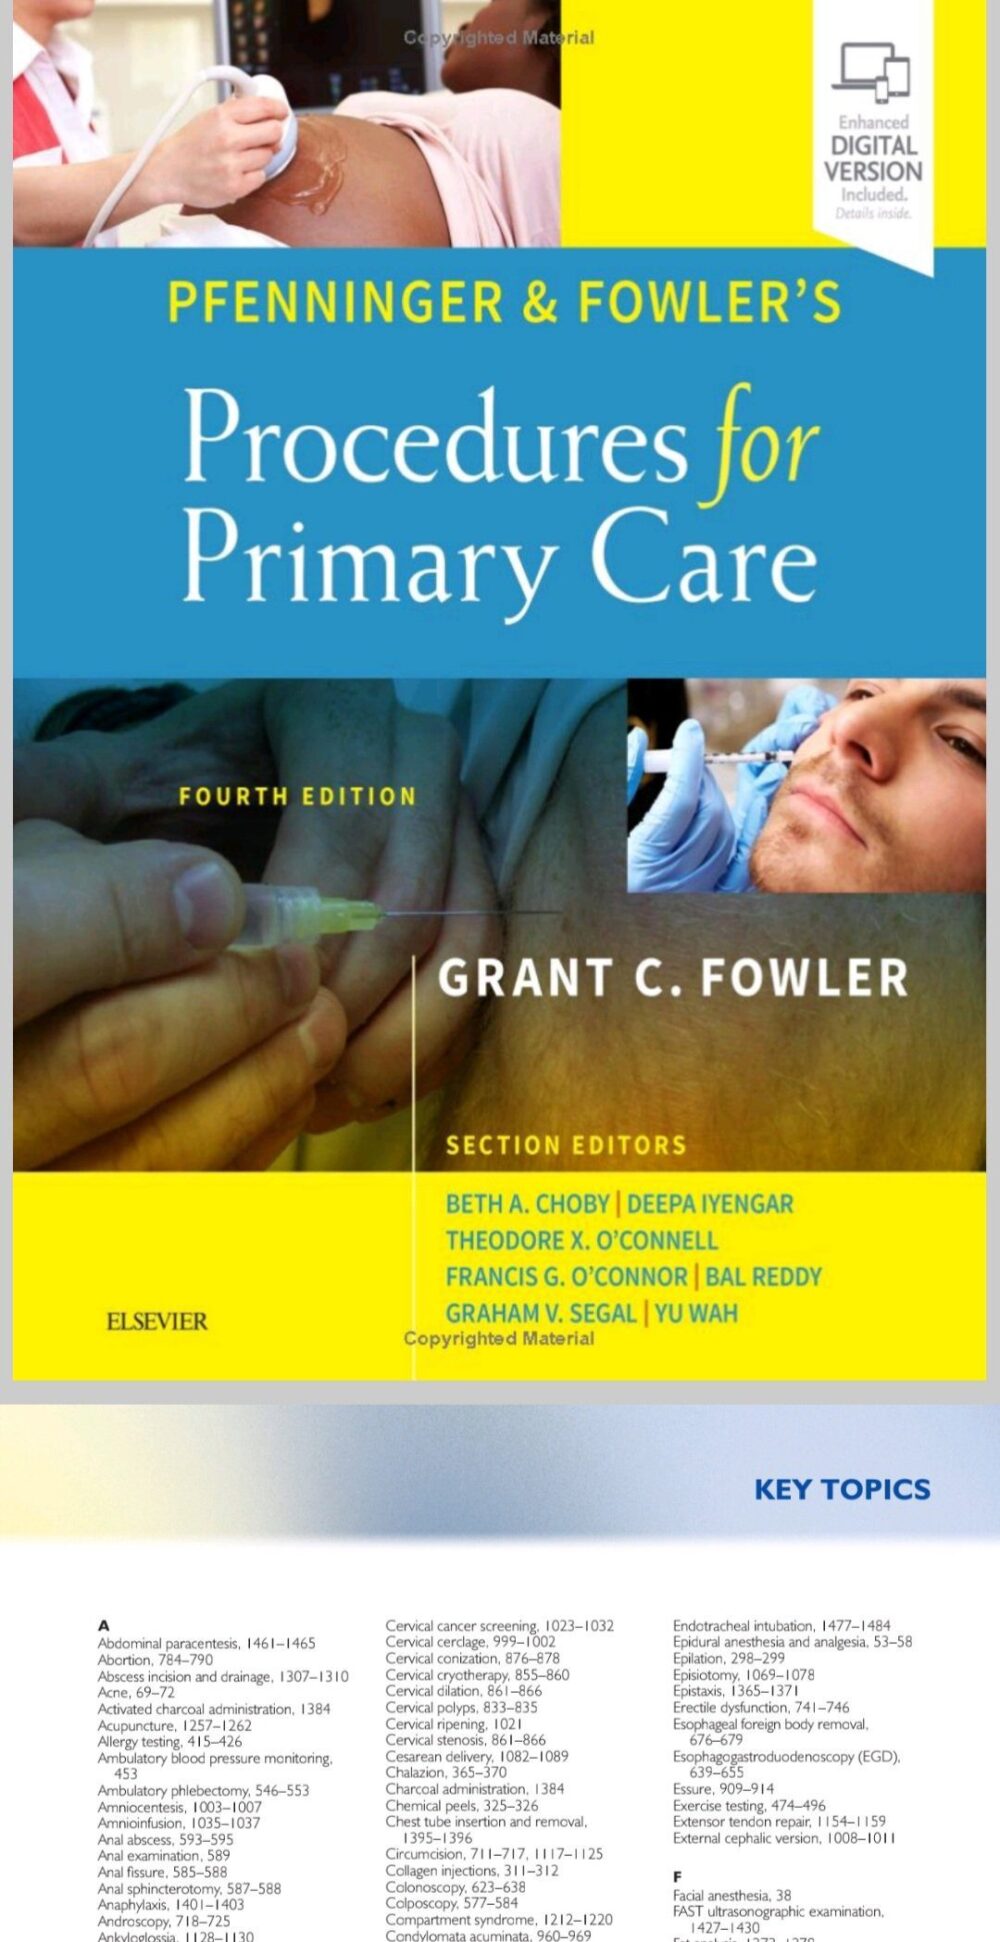 Pfenninger and Fowler’s Procedures for Primary Care 4th Edition